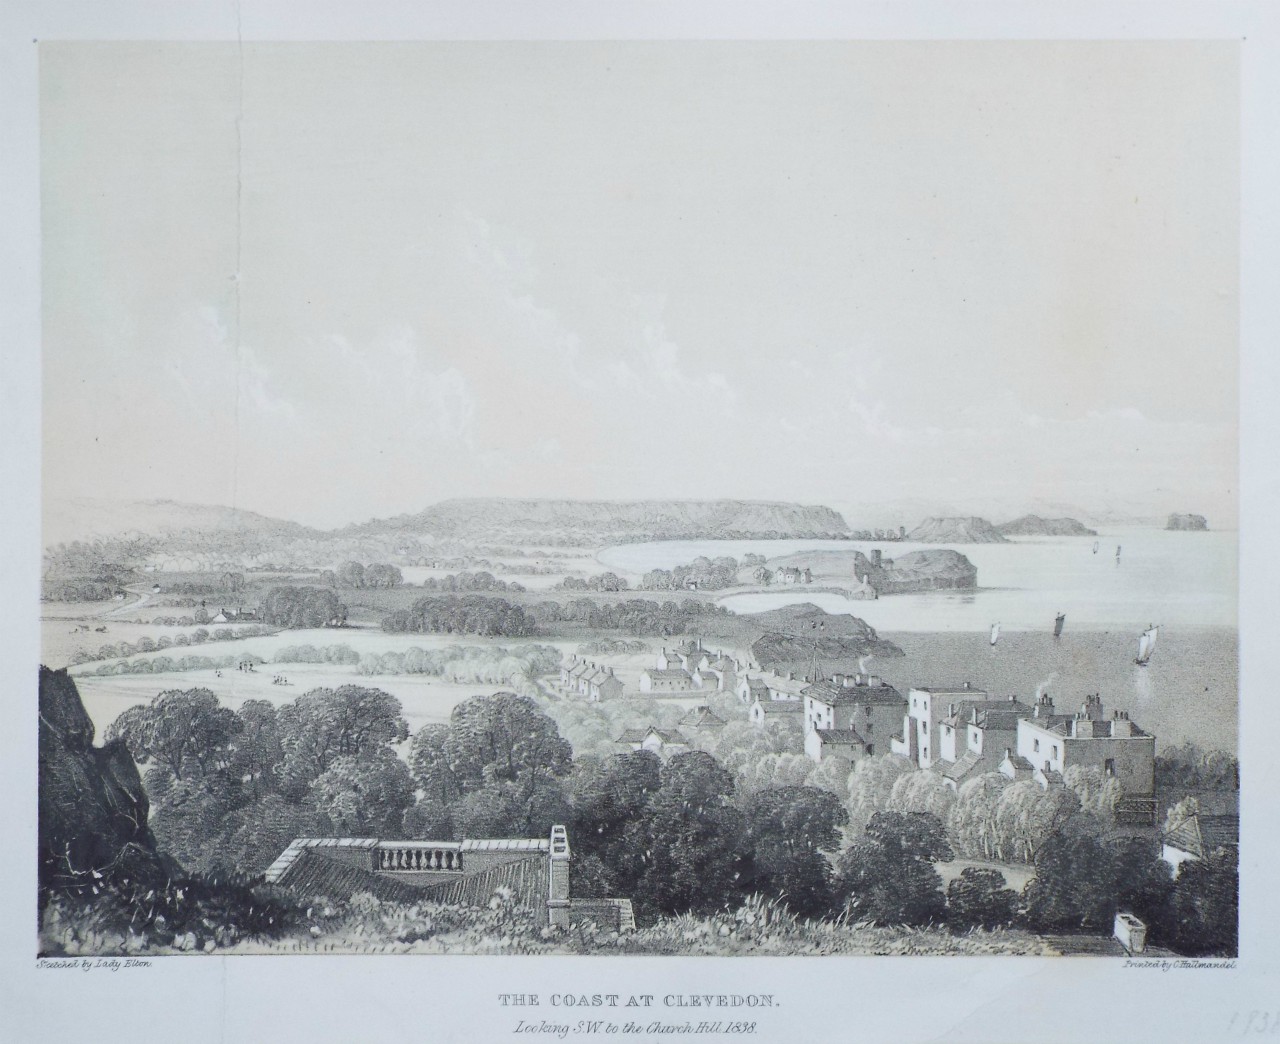 Lithograph - The Coast at Clevedon. Looking S.W. to the Church Hill 1838.